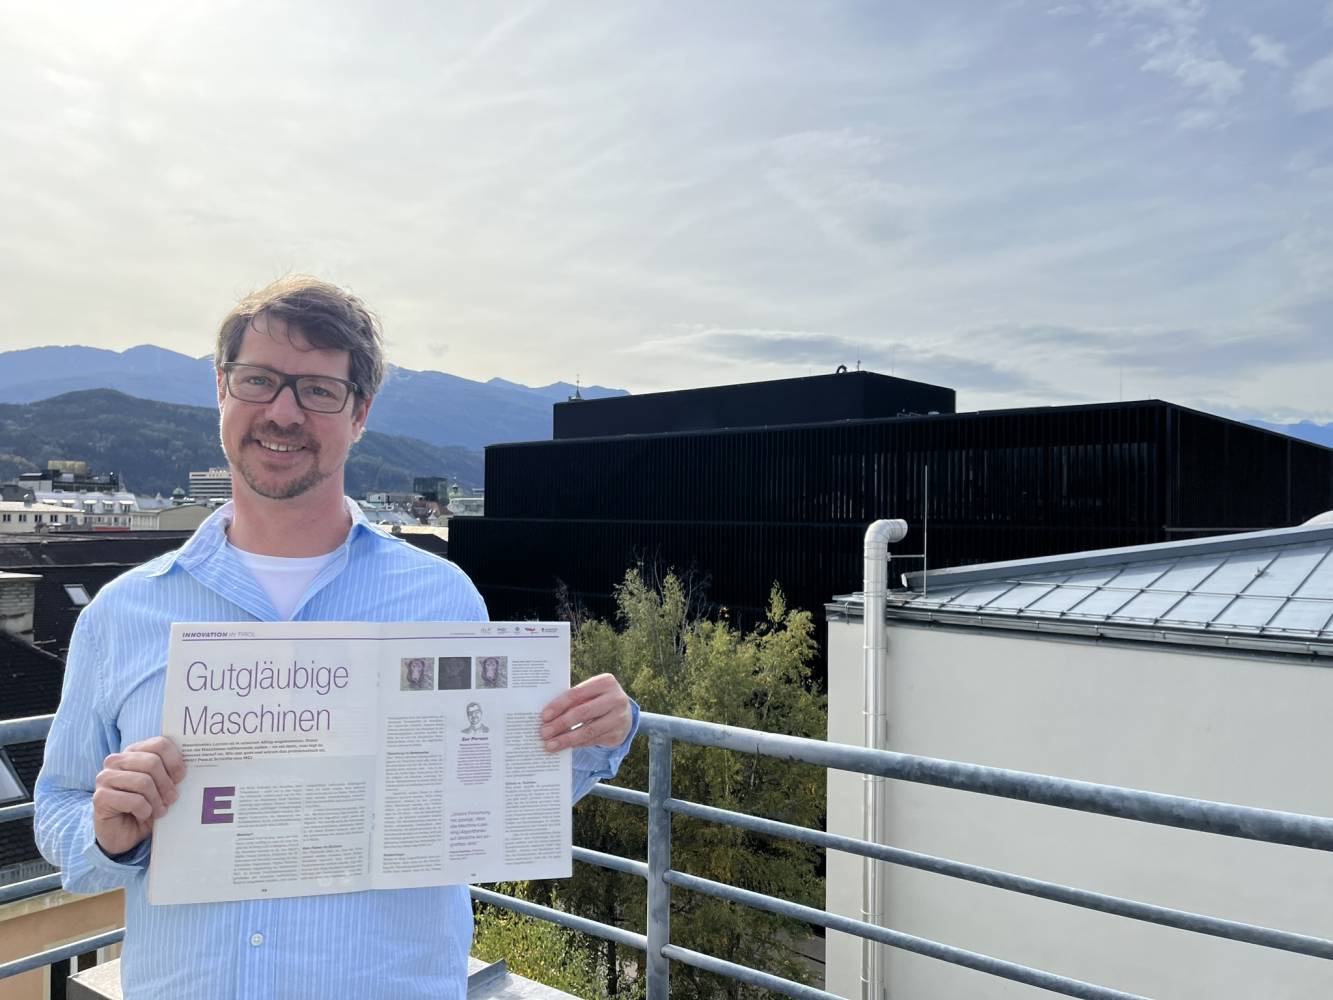 Professor Pascal Schöttle talks to Top Tirol magazine about the growing importance of security issues in connection with machine learning.